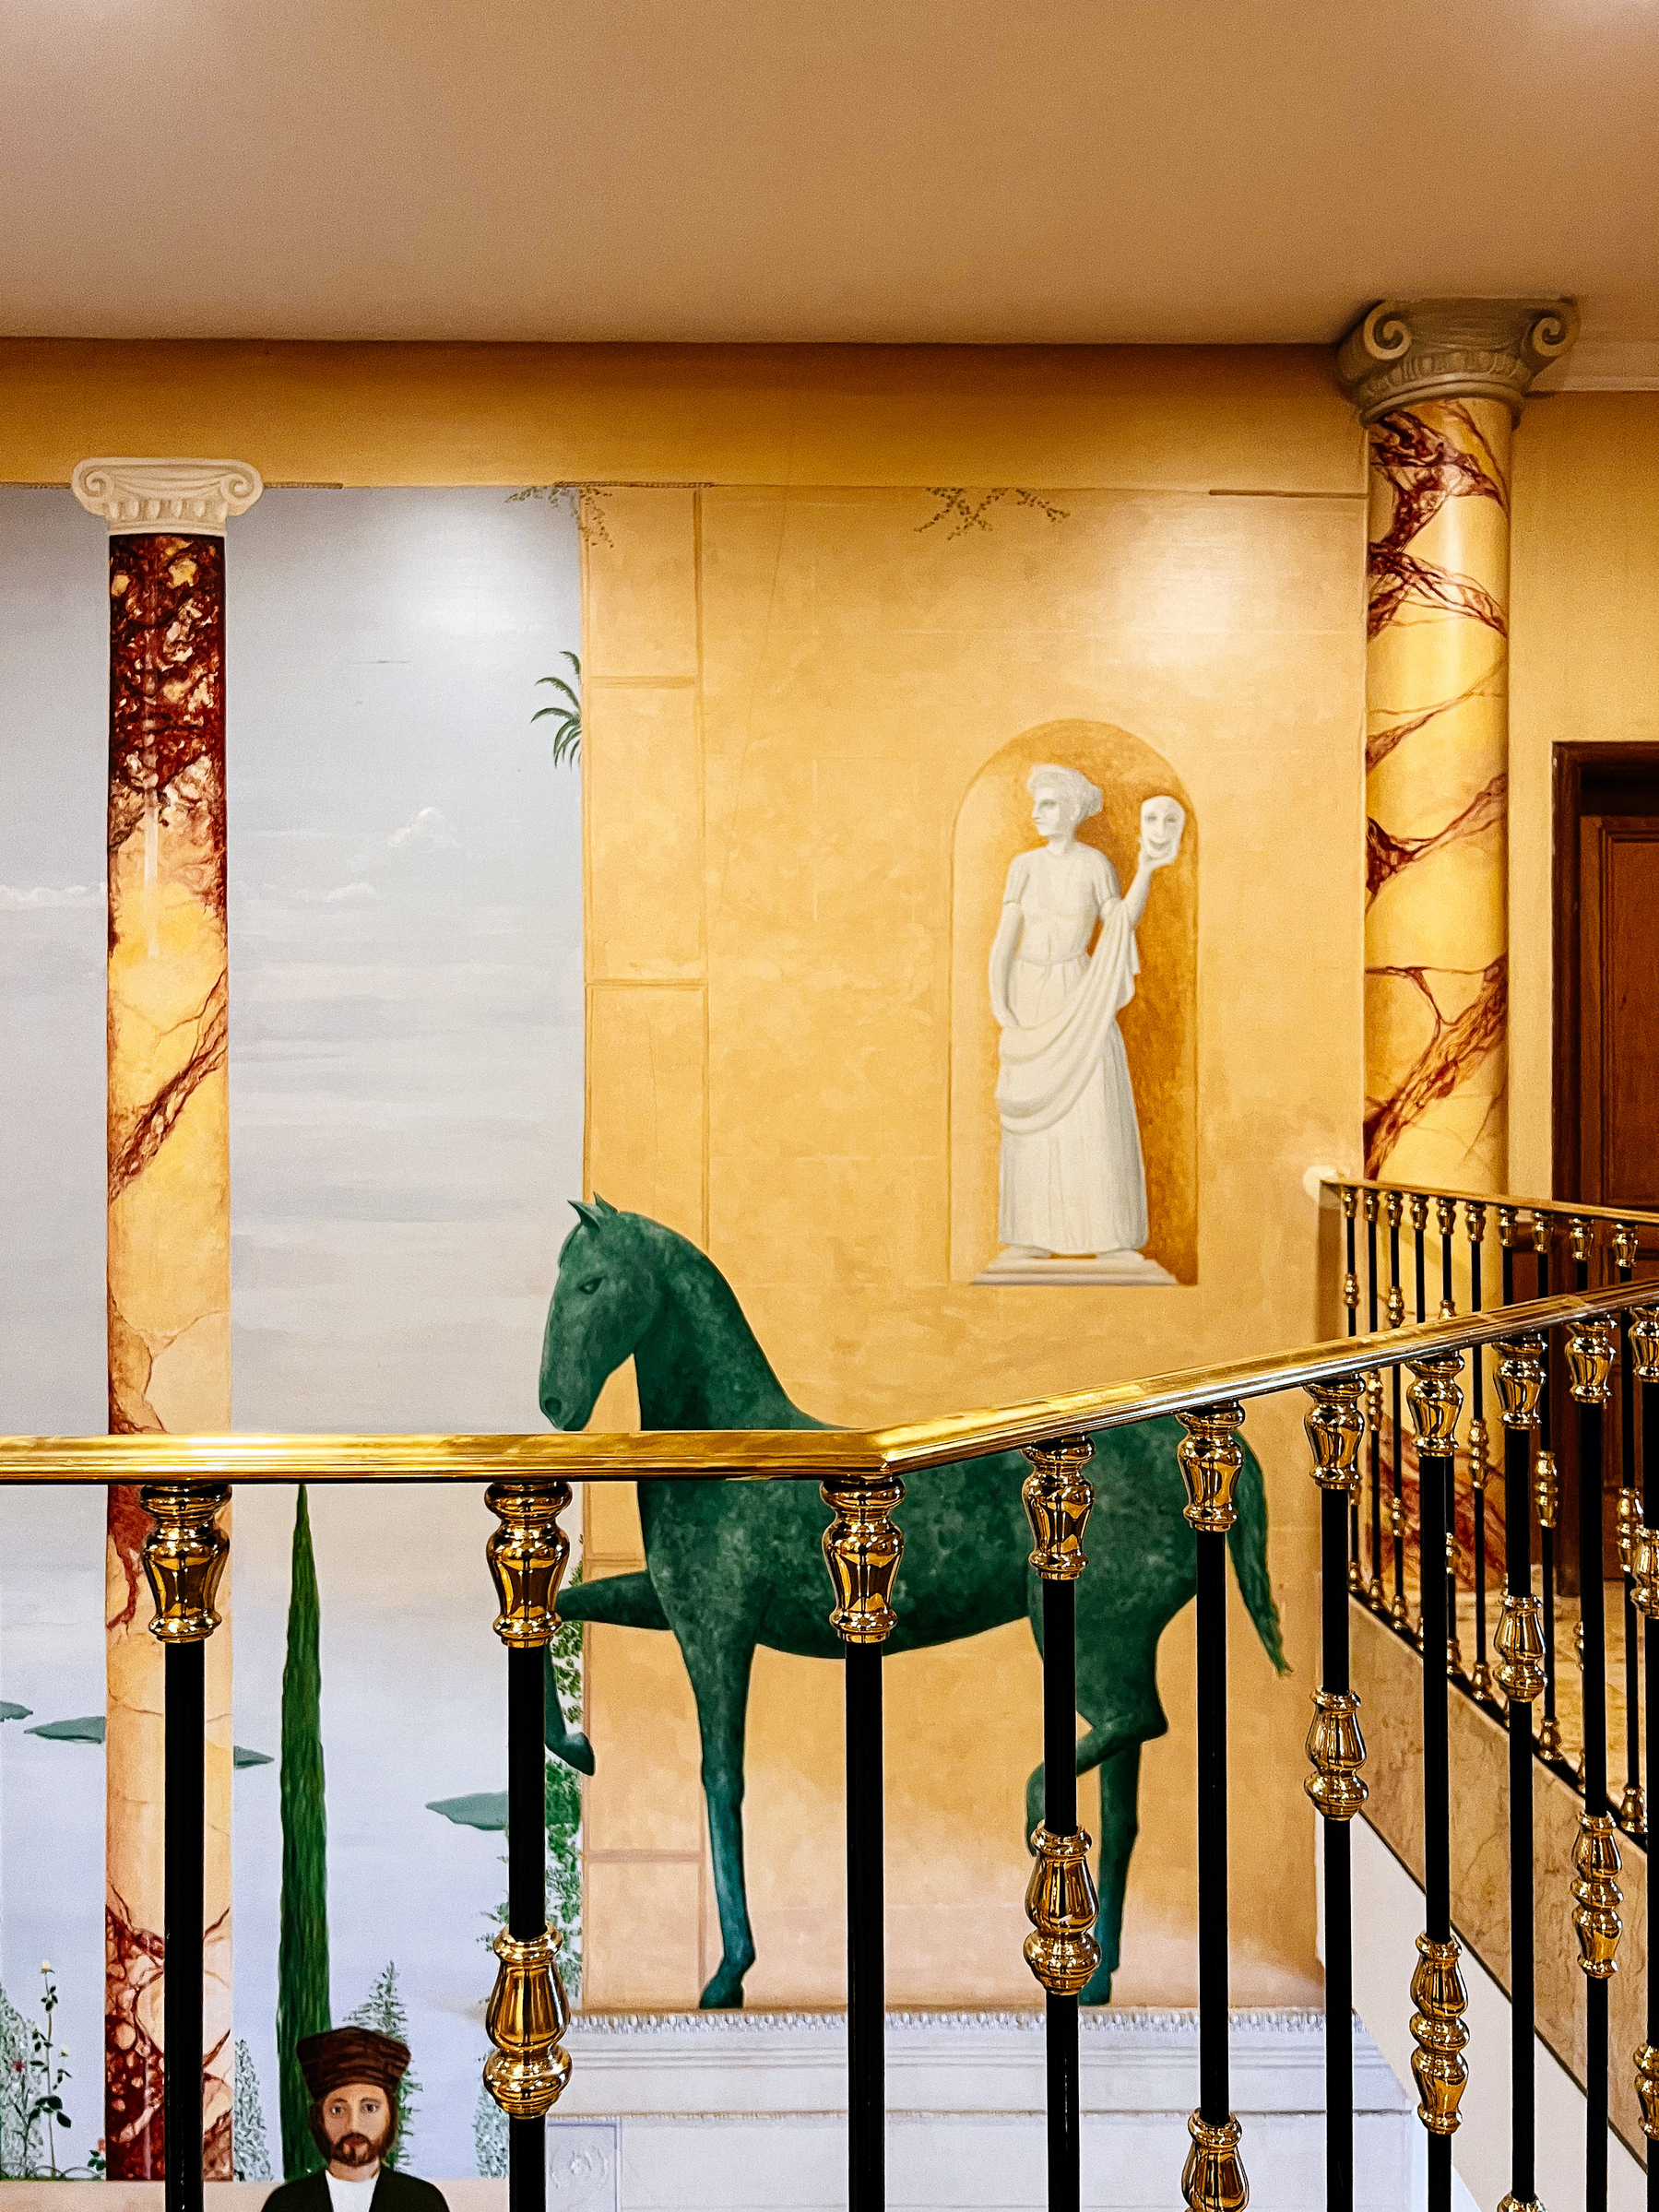 Part of a hotel lobby, a “fresco” is painted on the wall. A horse, columns, and a statue. 